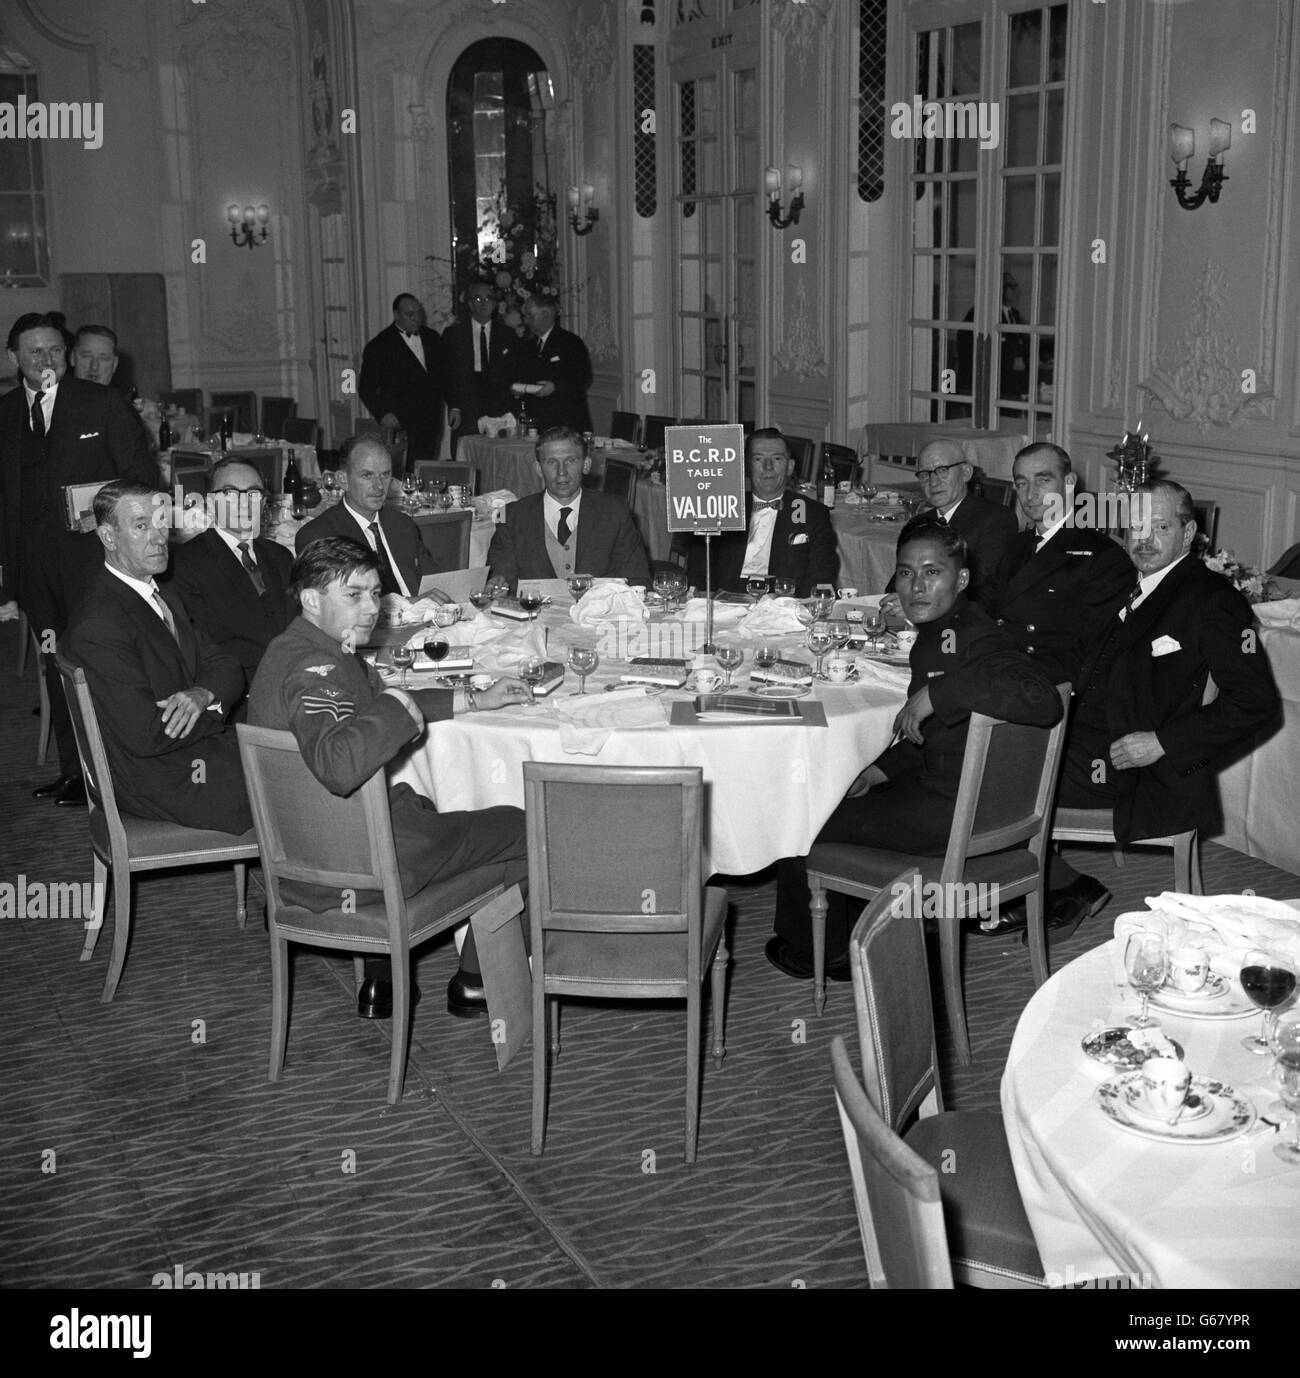 Ten men seated round the Table of Valor shortly before other guests took their seats at the Men of the Year Luncheon held at the Savoy Hotel, London. (From left) Sgt E.C. Smith, British railways driver Jack Mills, J. Laurence, P.M. Keenan, P. Darvill, A. Burrows, F. Frost, Lieutenant-Commander E.R. Anson, Group Captain Cleave and Rifleman N. Rai. The luncheon was organised by the British Council for Rehabilitation of the Disabled and the theme was 'Courage and Achievement'. Stock Photo